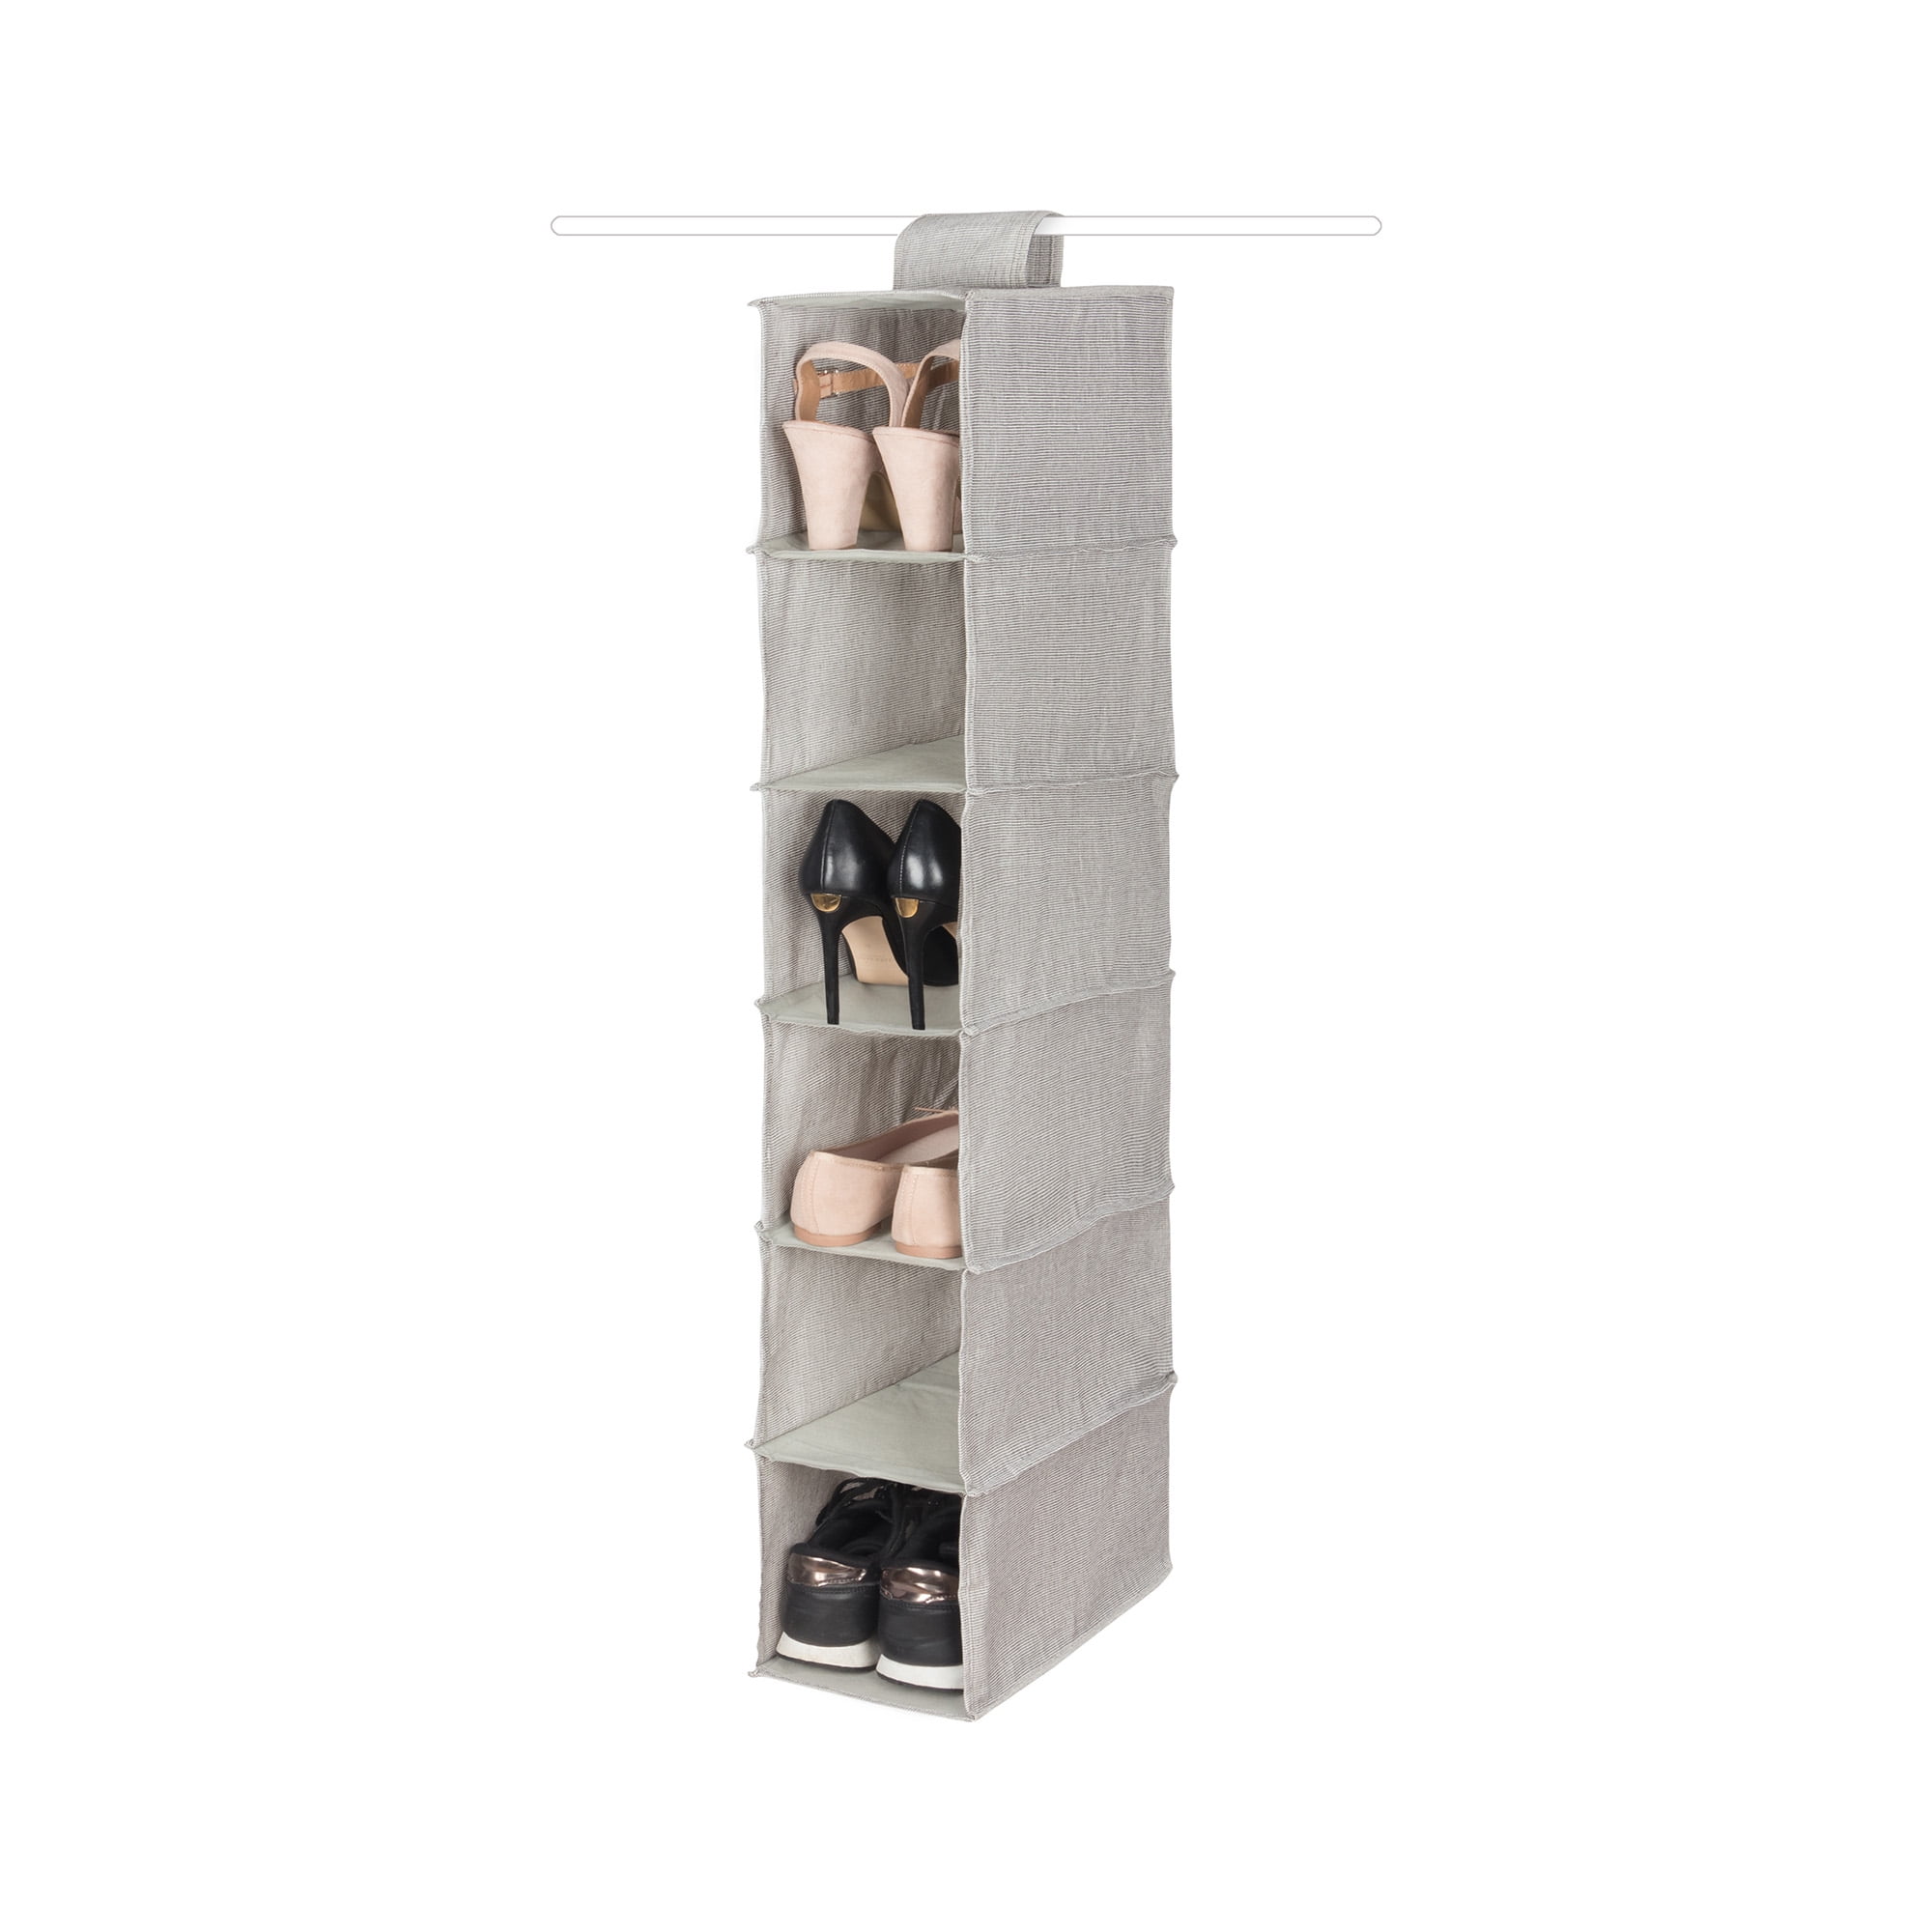 VASAGLE Shoe Storage Cabinet 10 Tier Elegant Shoe Rack Organizer Holds Up  to 30 Pairs of Shoes for Entryway Bedroom 12.6 x 24.8 x 73.6 Inches White